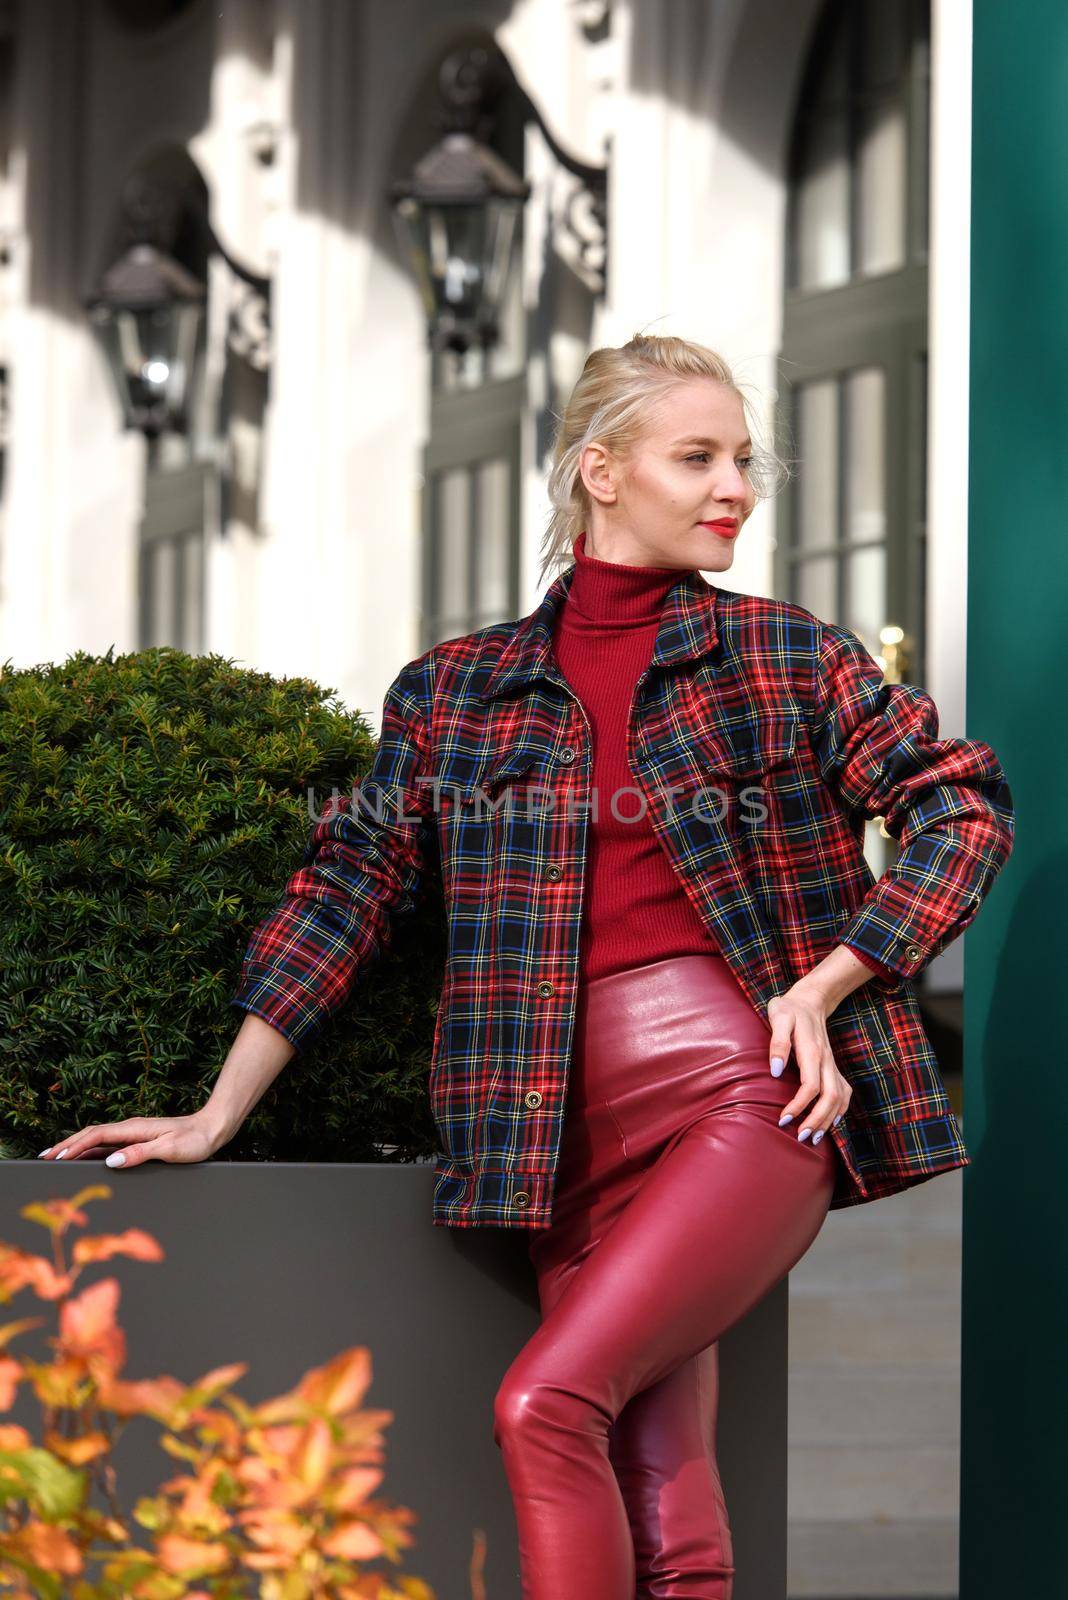 A beautiful, modern, fashionable blonde girl with a red lipstick posing outdoors . Dressed in a red leather leggings, turtleneck and checkered jacket.